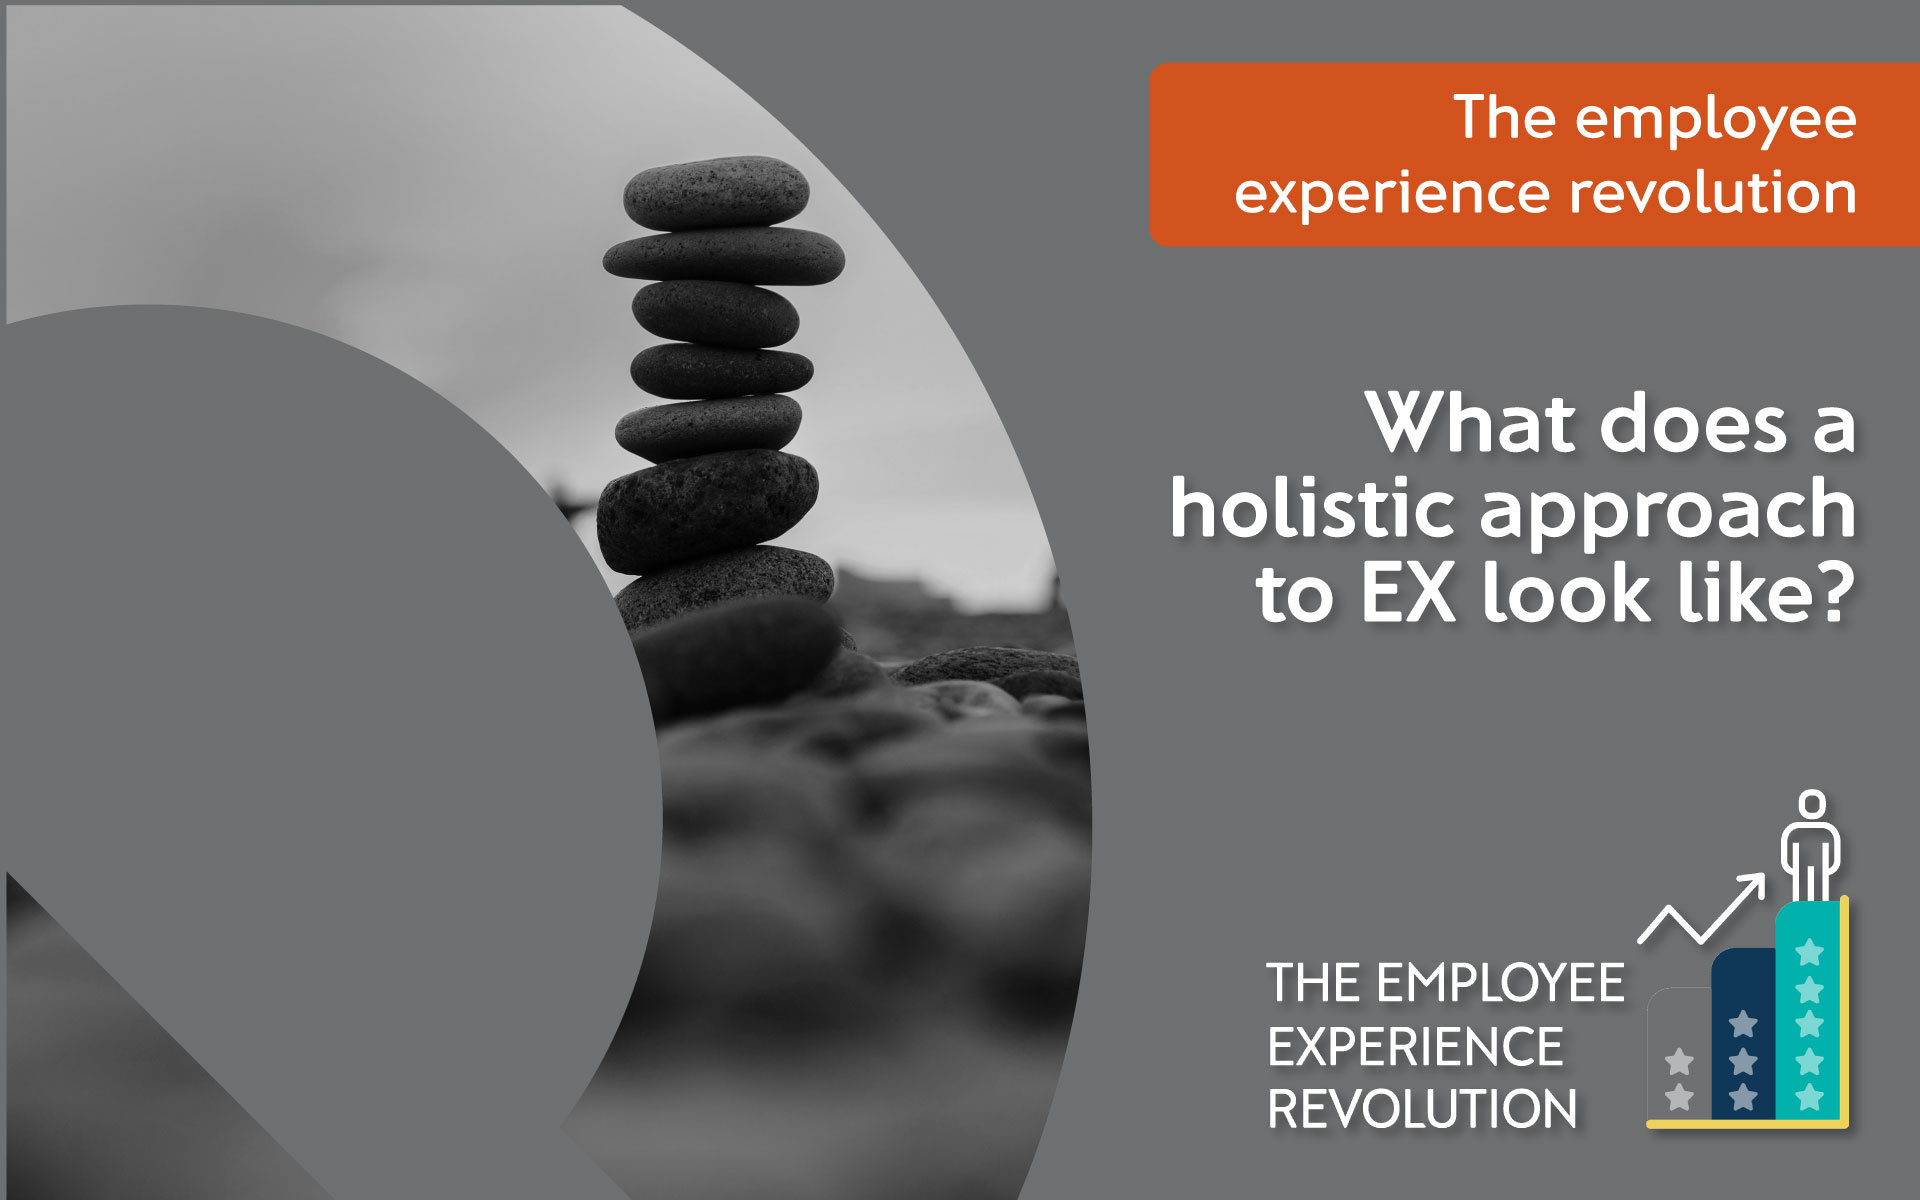 What does a holistic approach to EX look like?